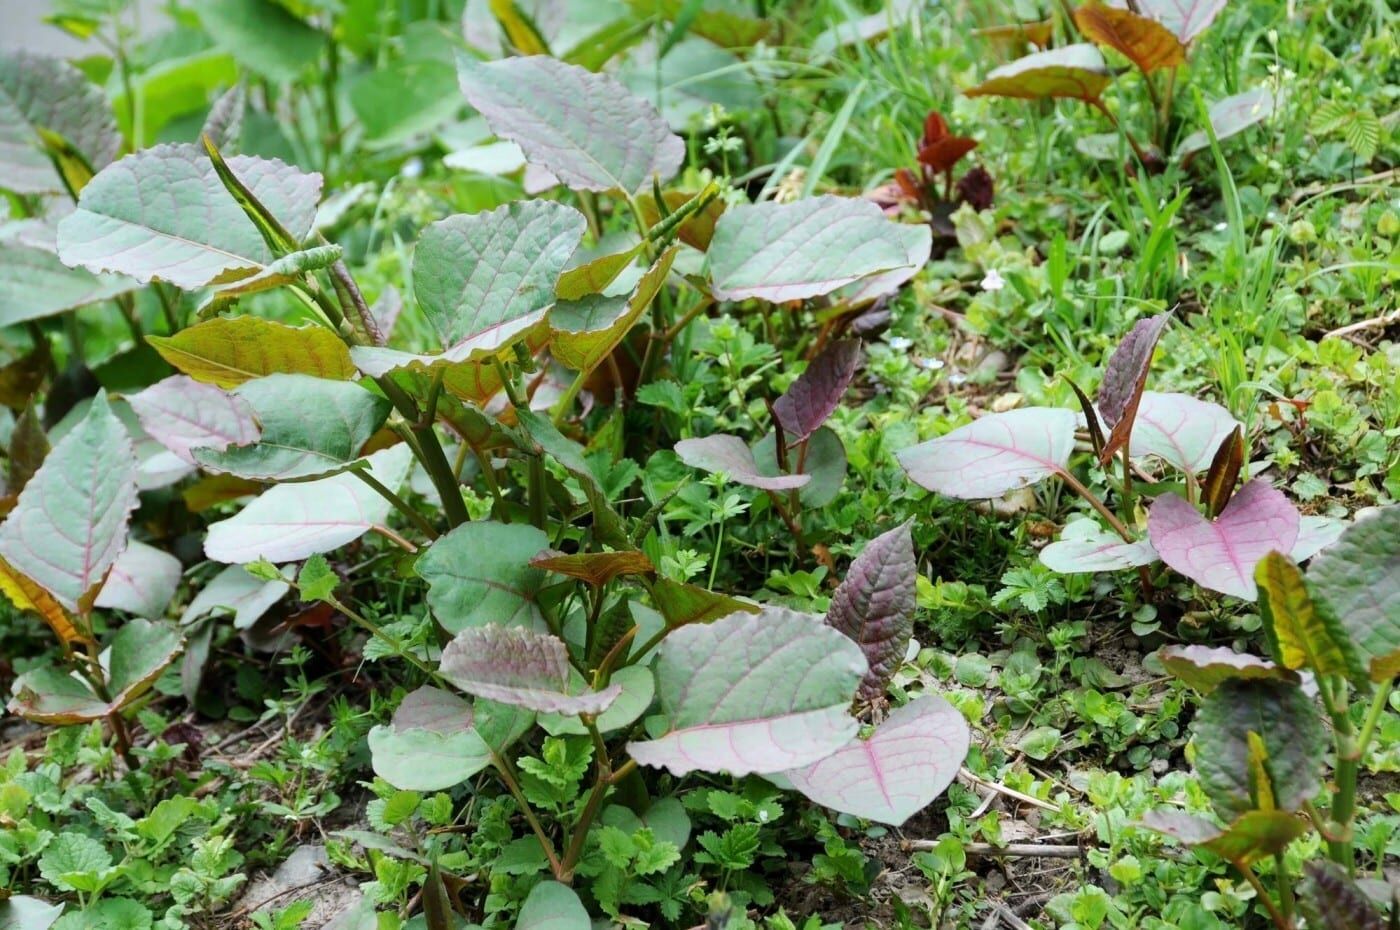 How to Identify Japanese Knotweed